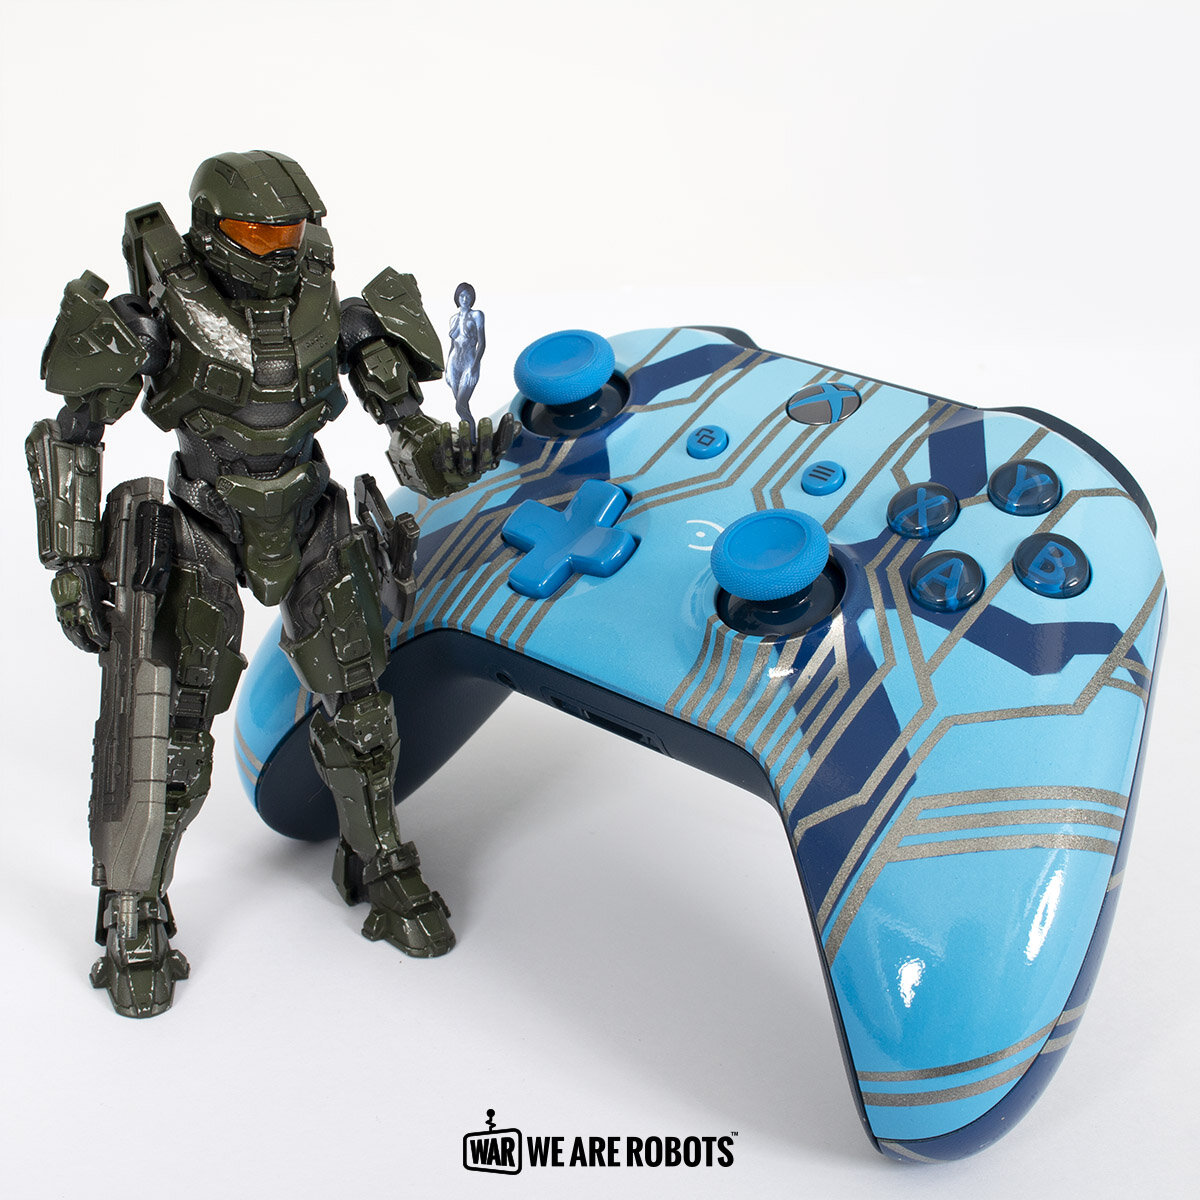 We Are Robots - Halo Cortana Xbox One Controller